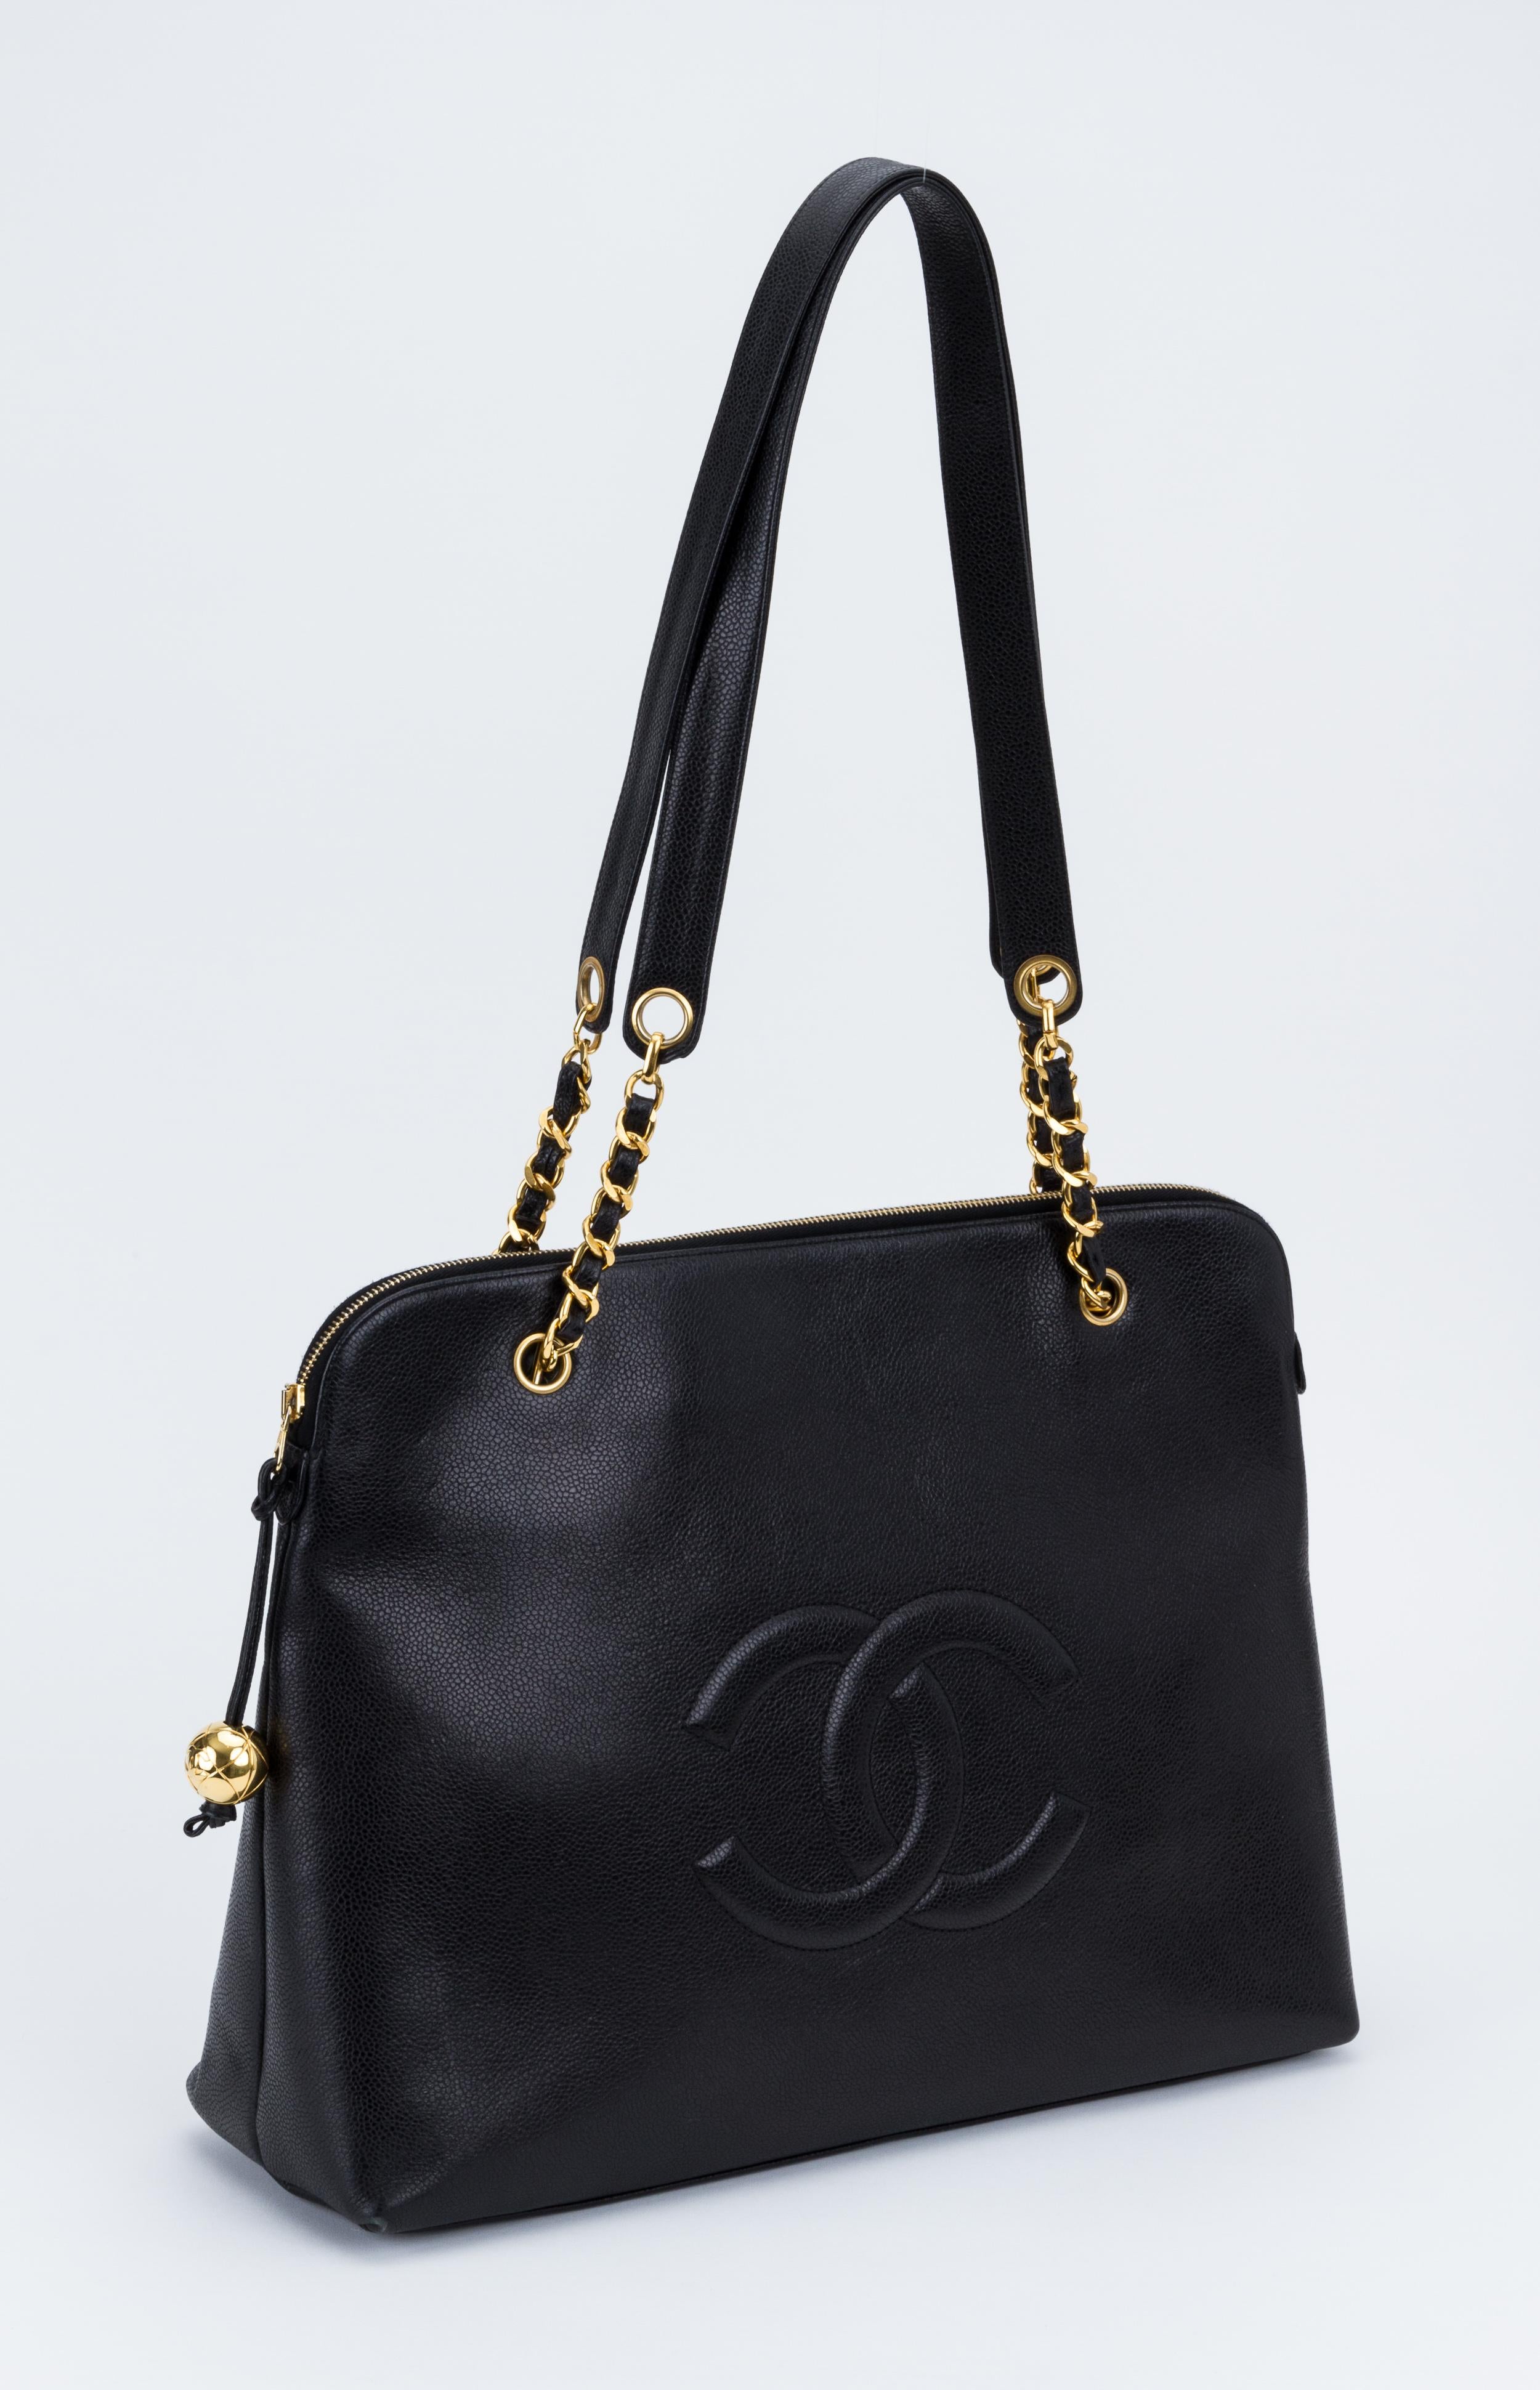 Chanel 90s large shoulder tote, travel collection. Black caviar leather and yellow gold hardware. Shoulder drop 15